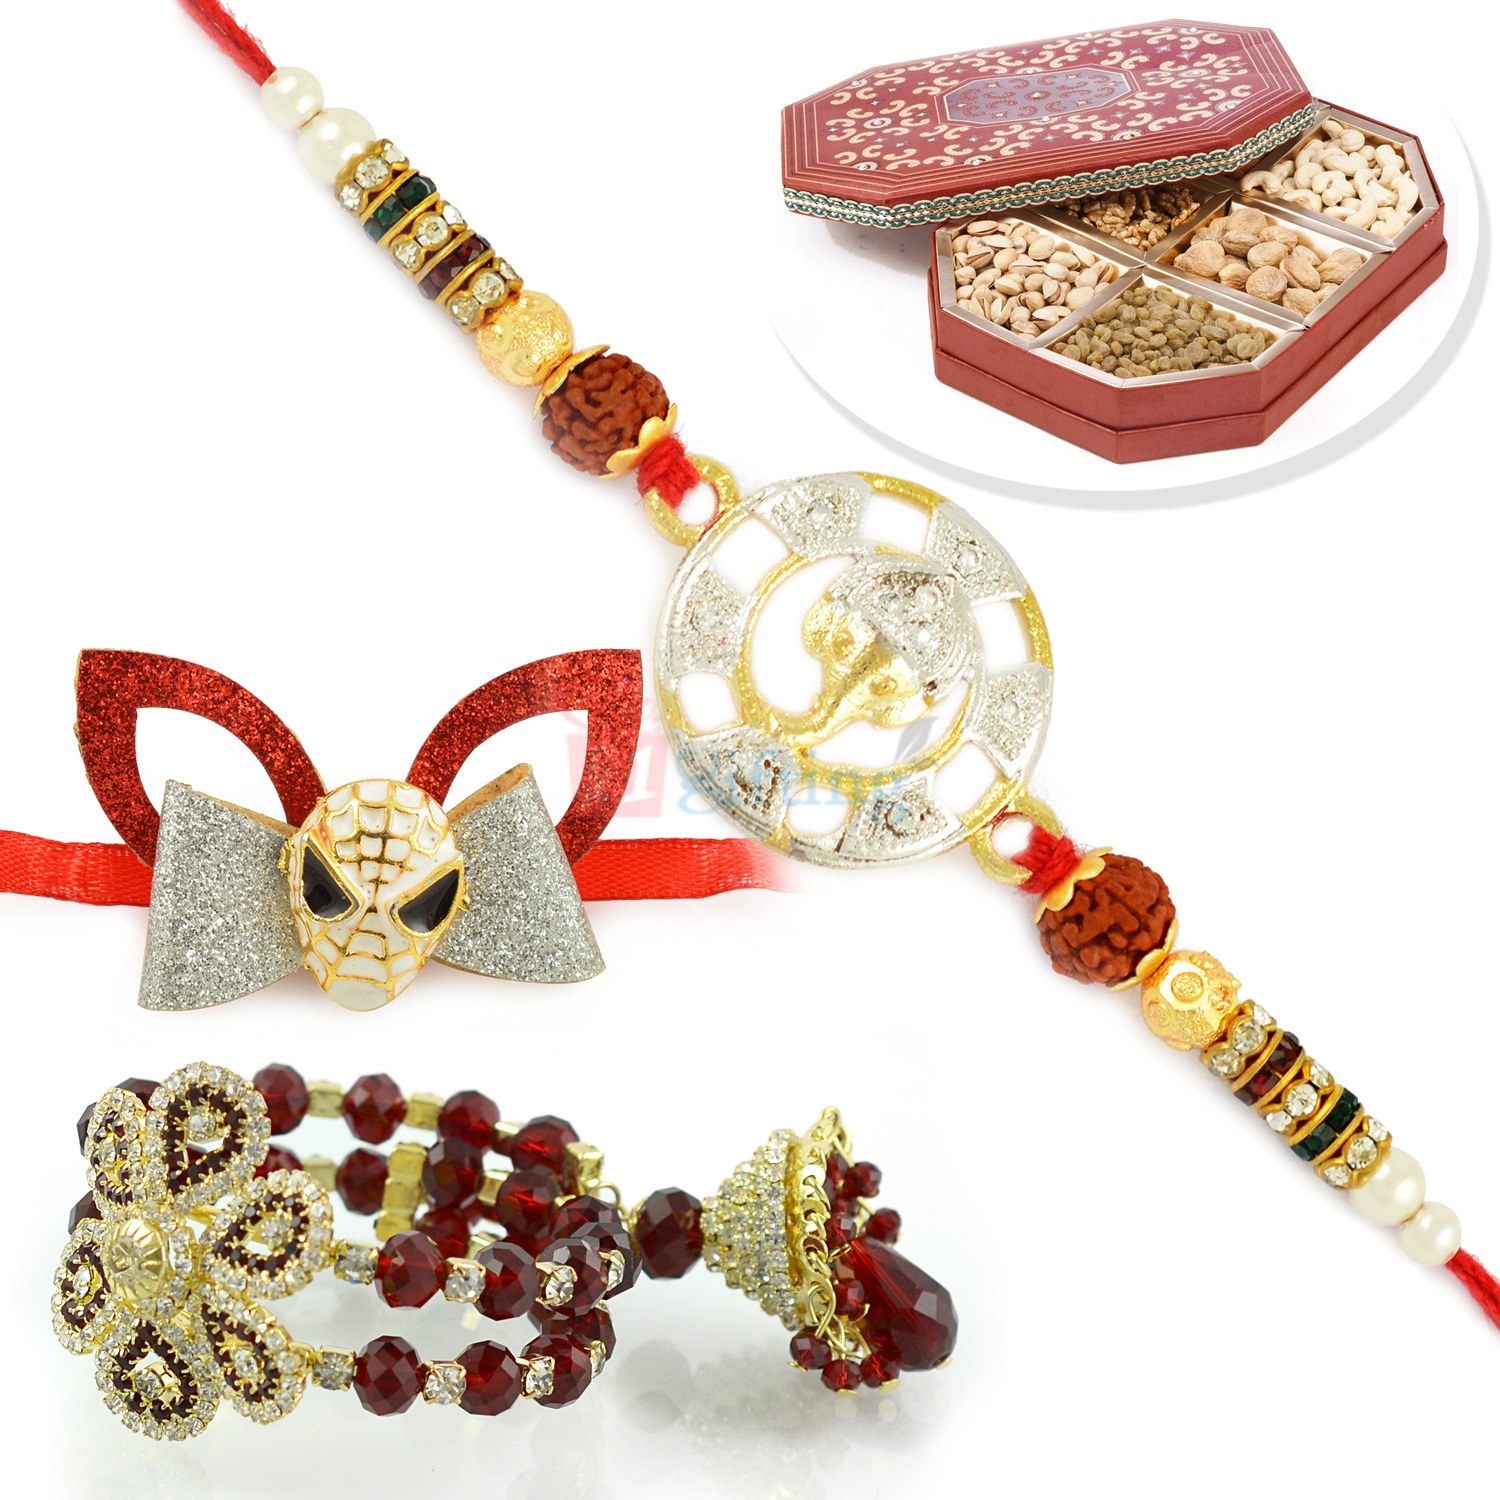 Awesome Jewel Pair and Kids Rakhi with Dryfruits Box